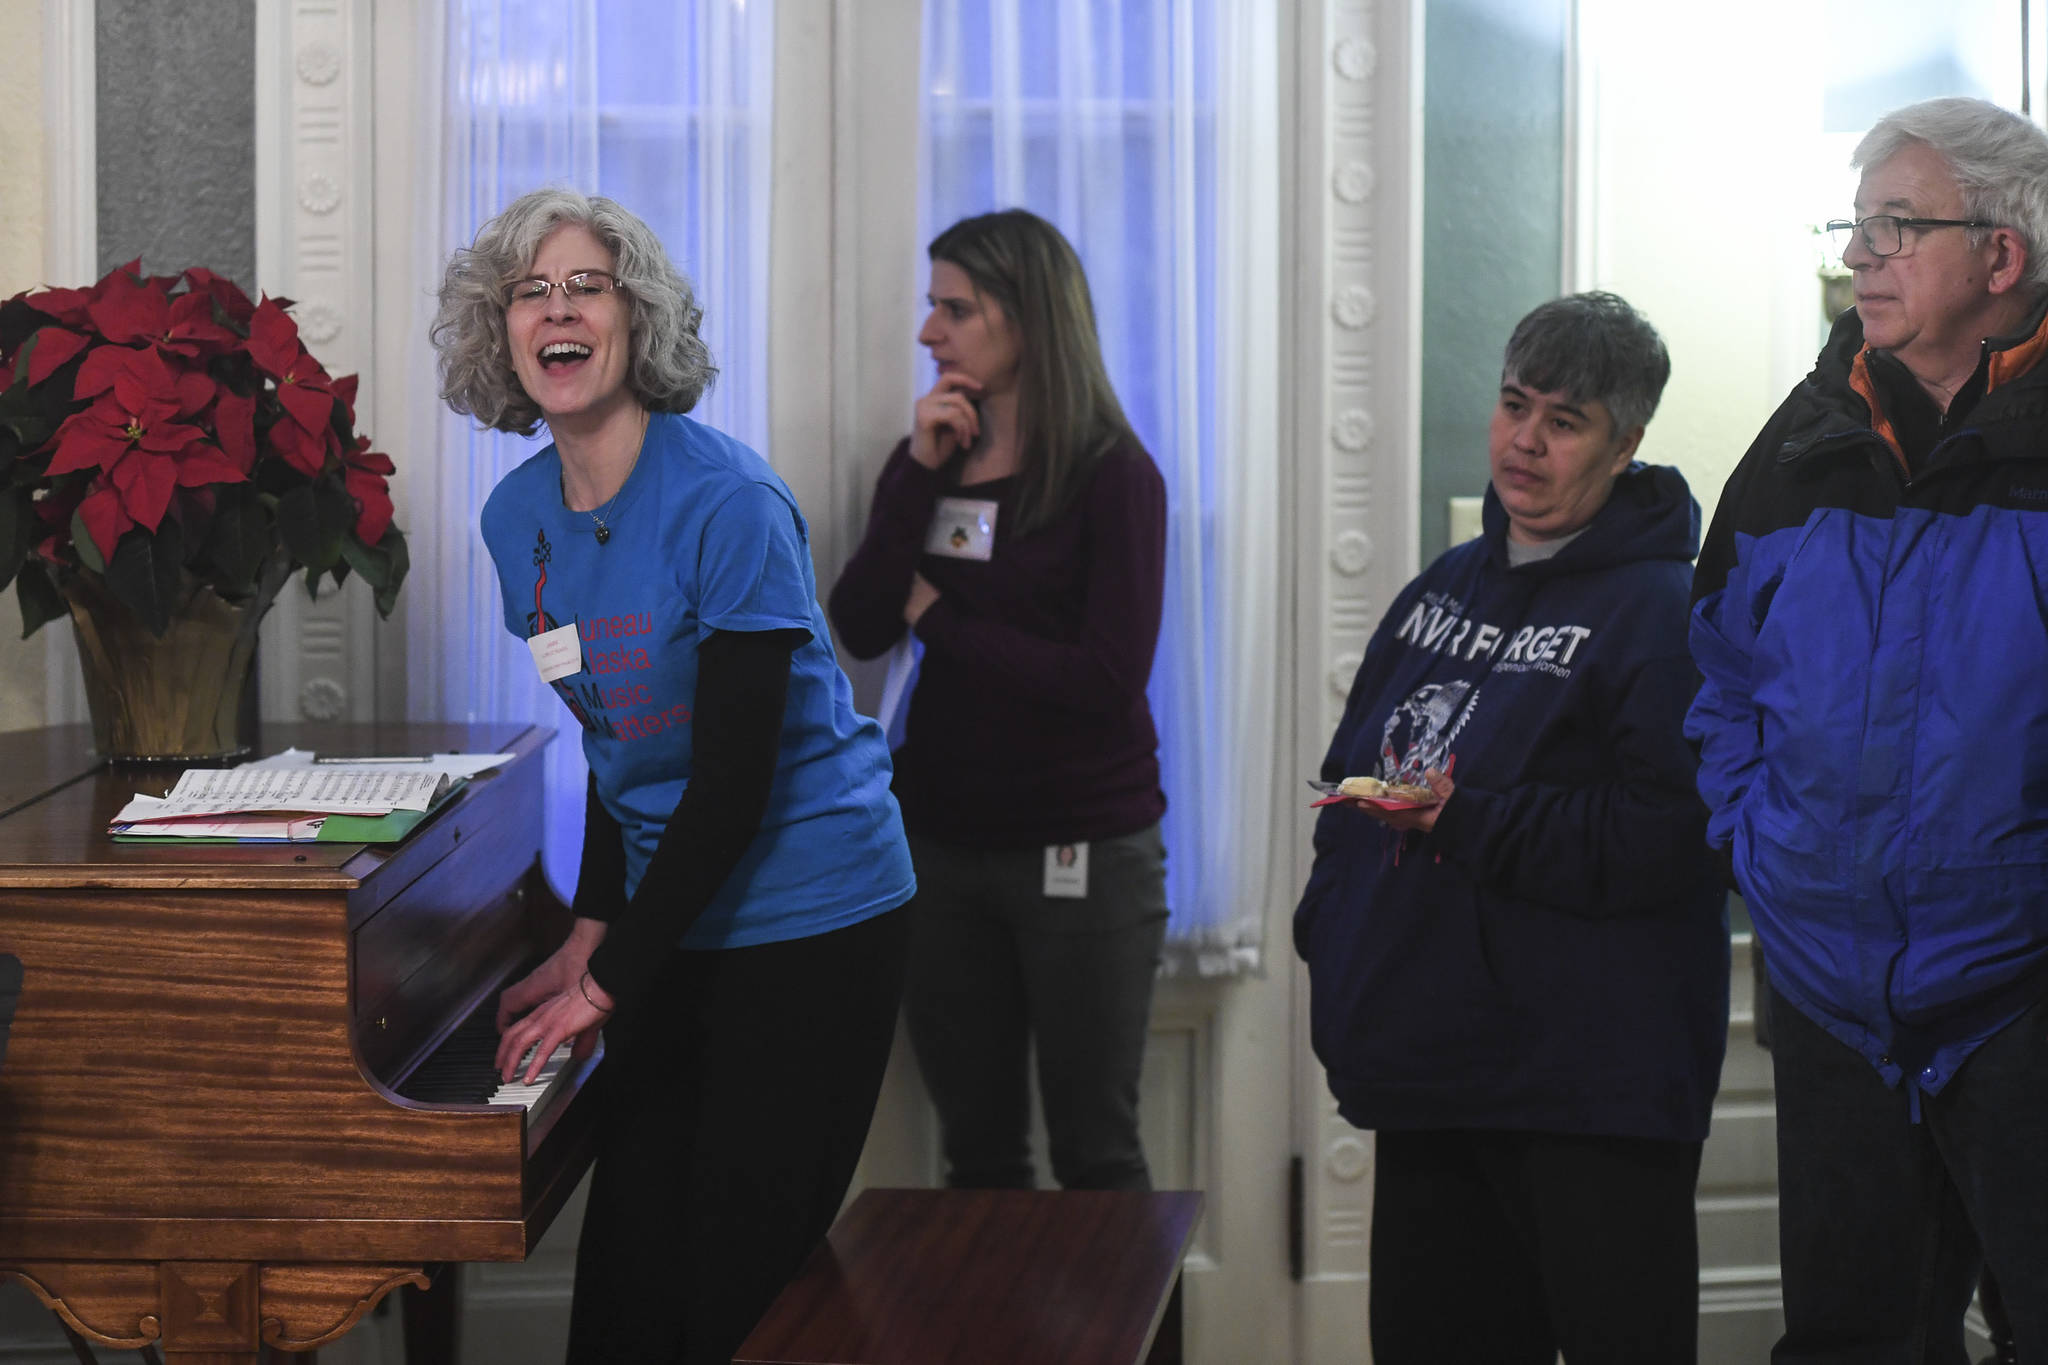 Lorrie Heagy, Executive Director of JAMM and the music teacher at Glacier Valley, sings with the students during the Governor’s Open House on Tuesday, Dec. 10, 2019. (Michael Penn | Juneau Empire)